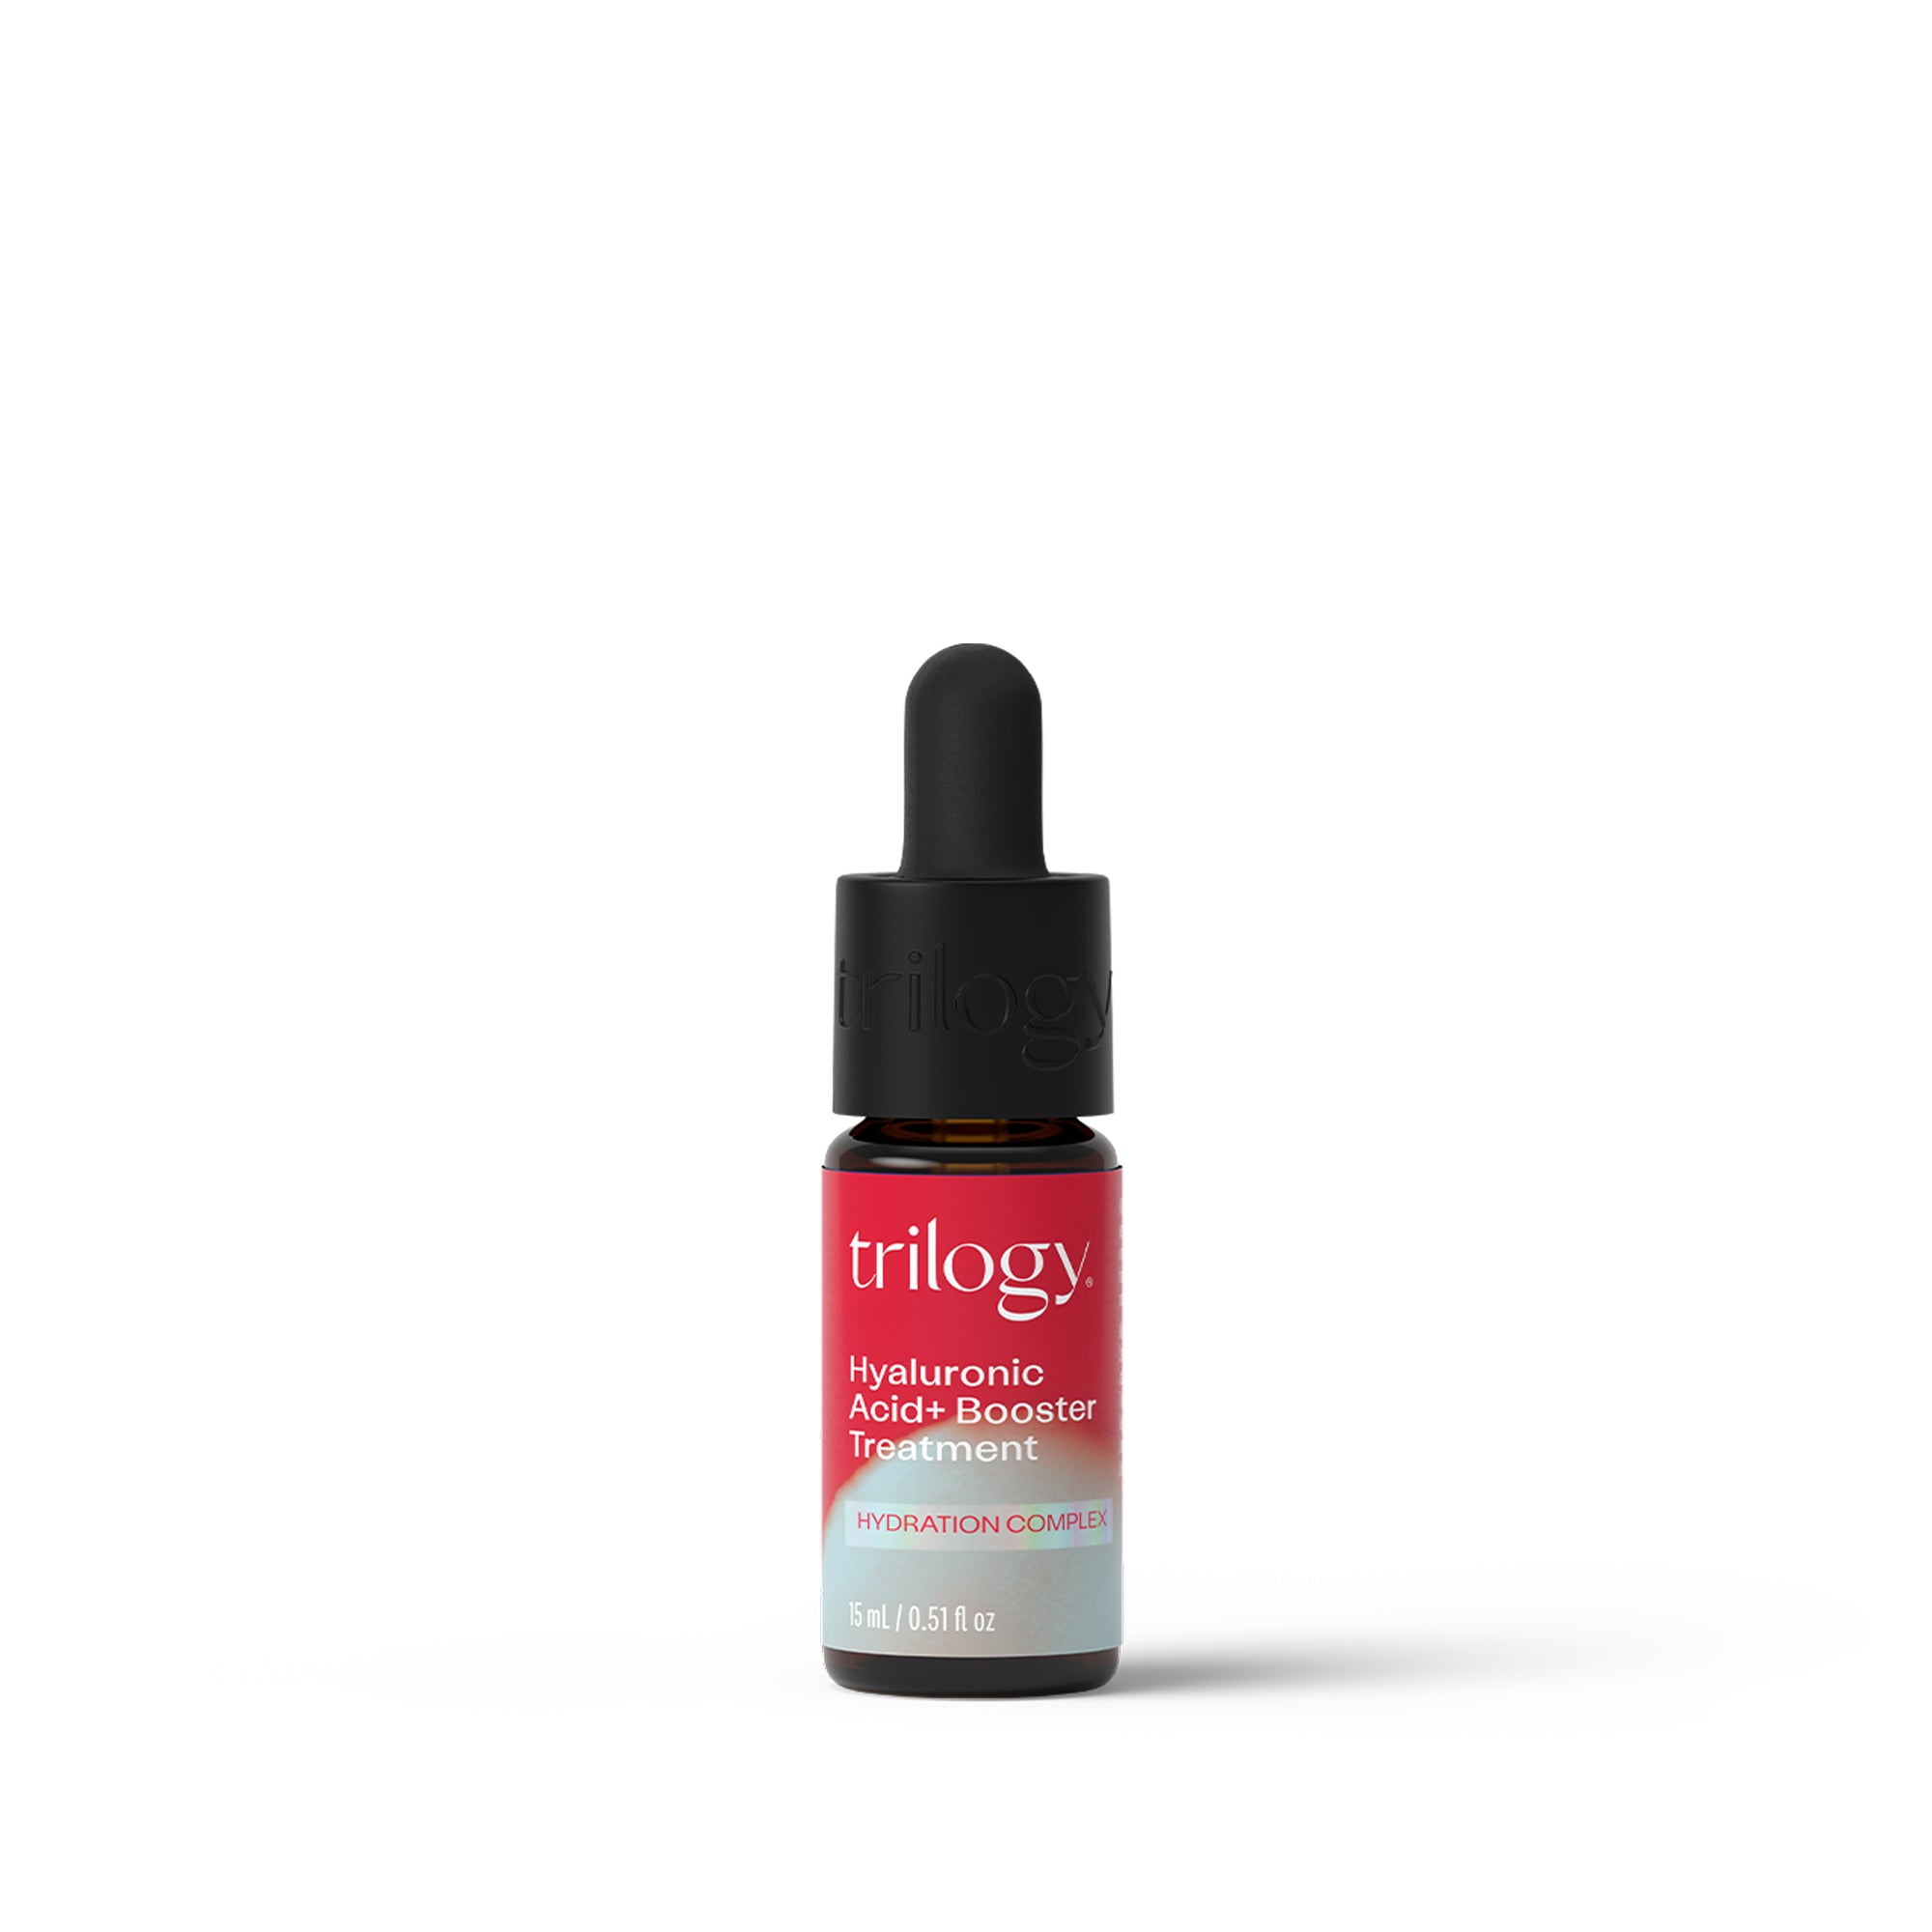 Hyaluronic Acid+ Booster Treatment 15mL